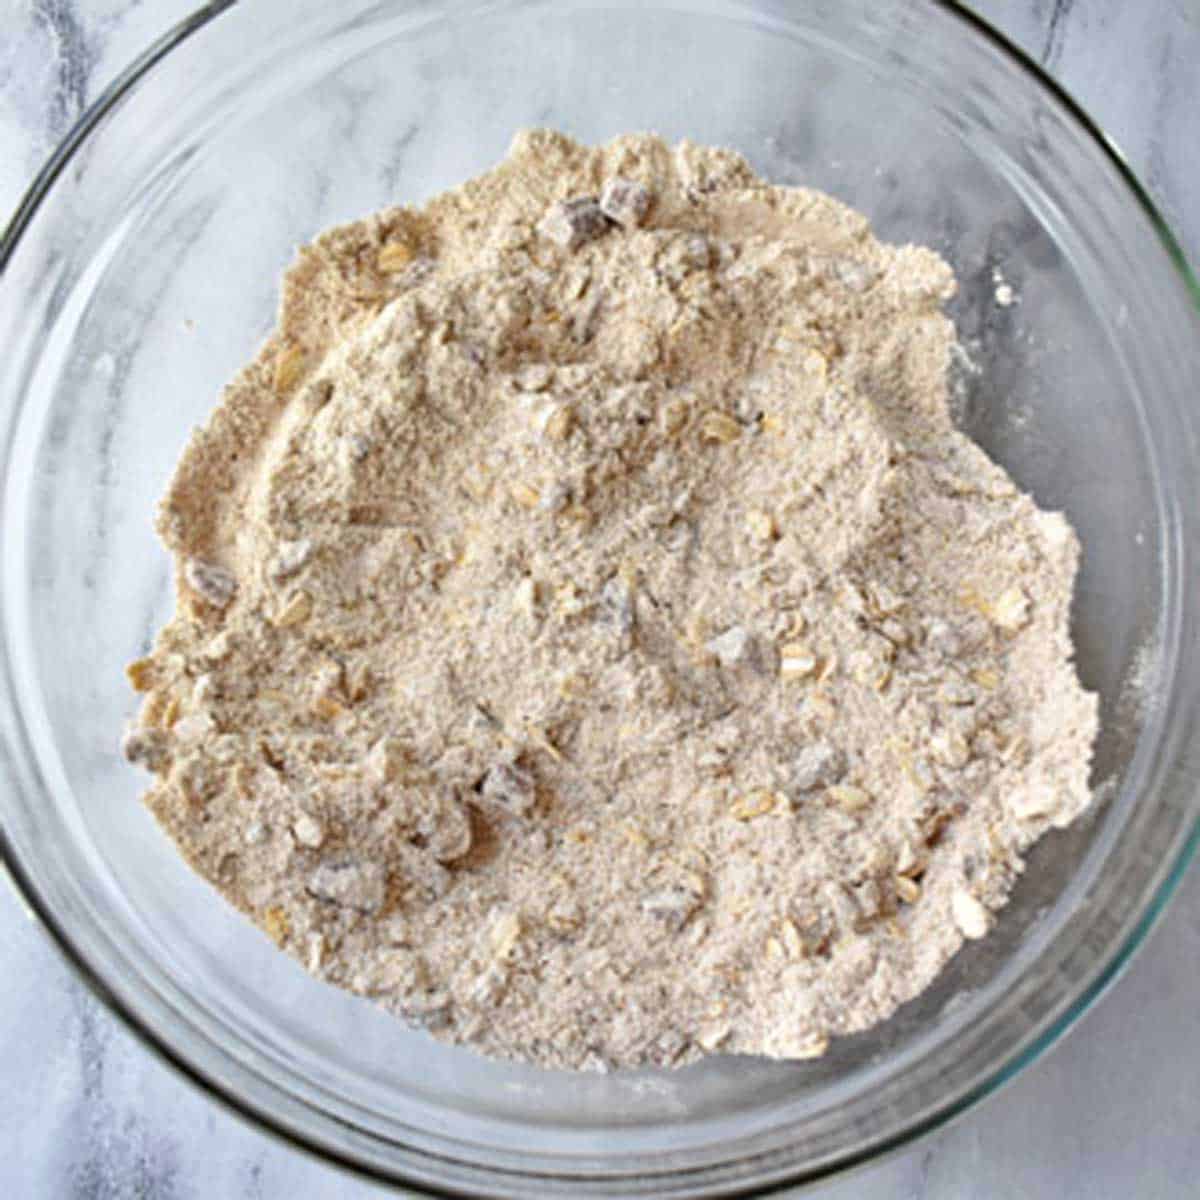 Gluten free flour, brown sugar, gluten free oats, salt, chopped pecans, and spices whisked together in a glass mixing bowl.